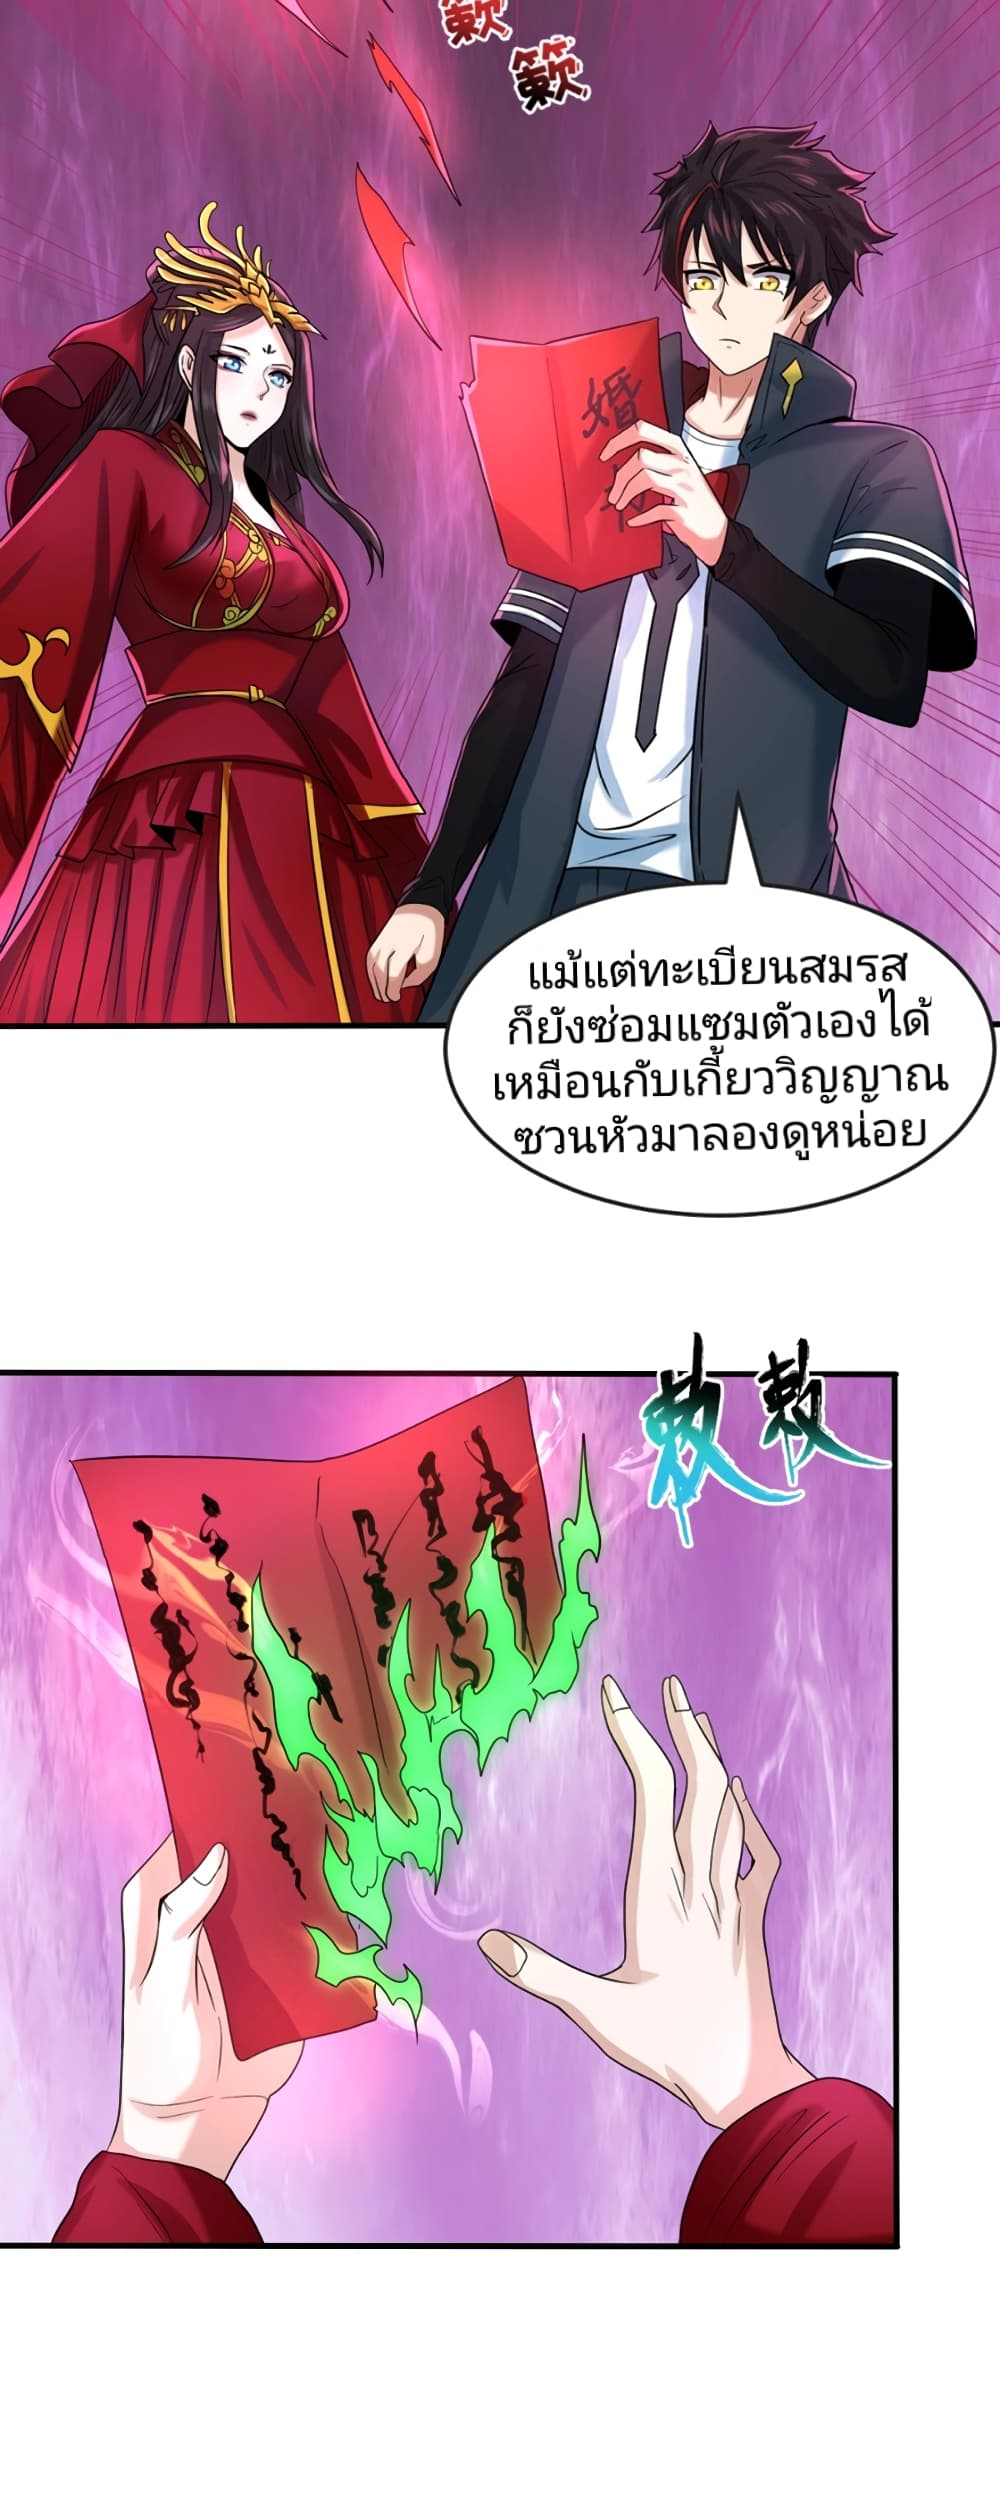 The Age of Ghost Spirits à¸à¸­à¸à¸à¸µà¹ 21 (18)